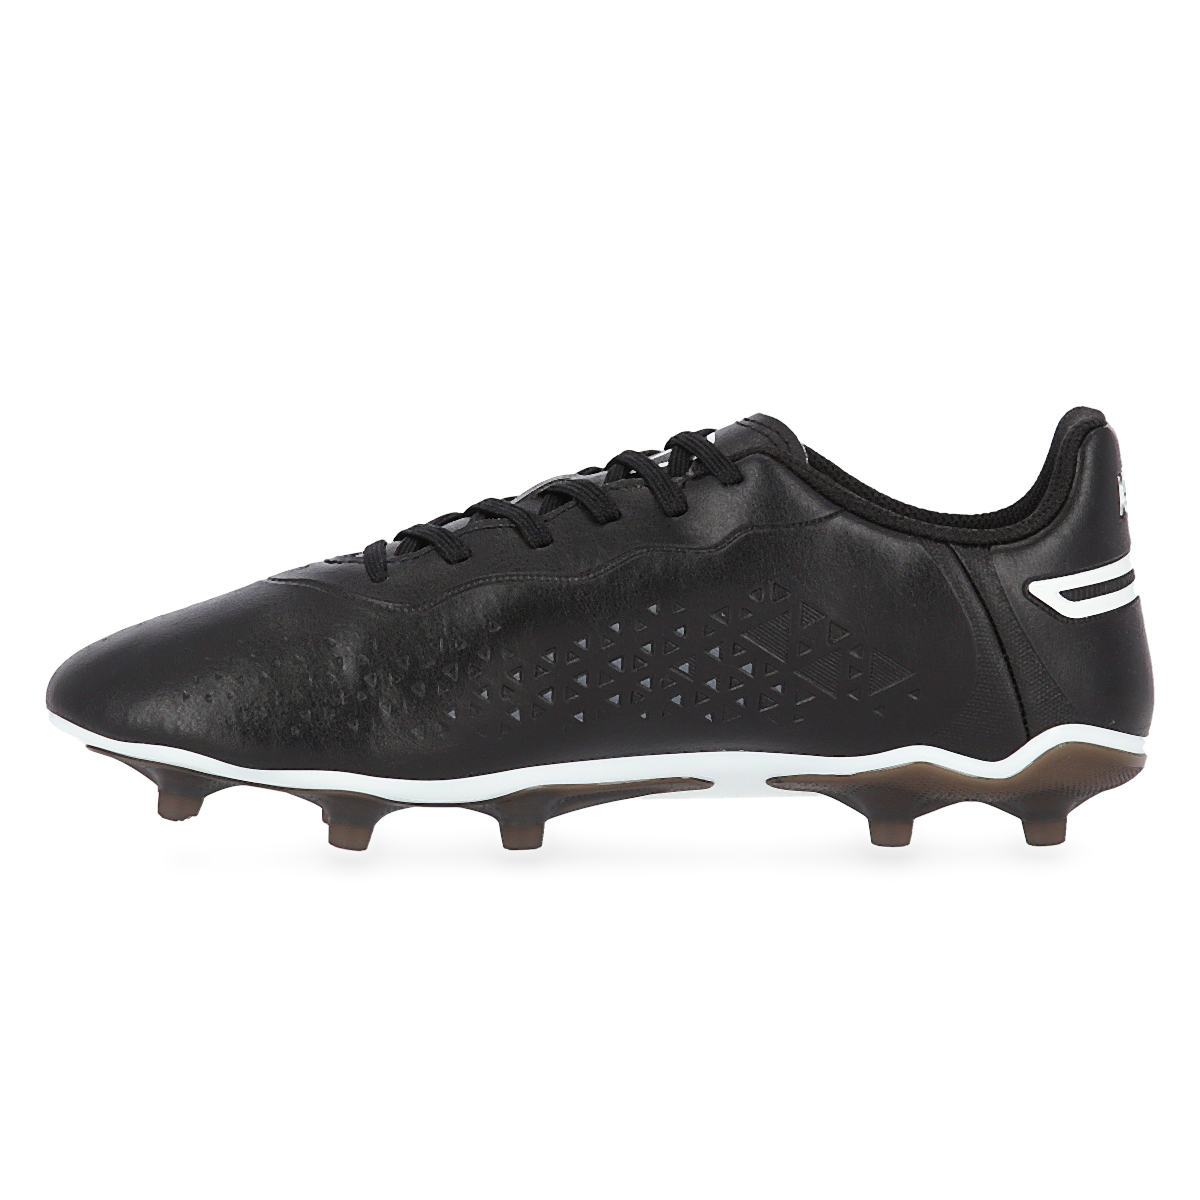 Botines  Fútbol Puma King Match FG/AG  Hombre,  image number null